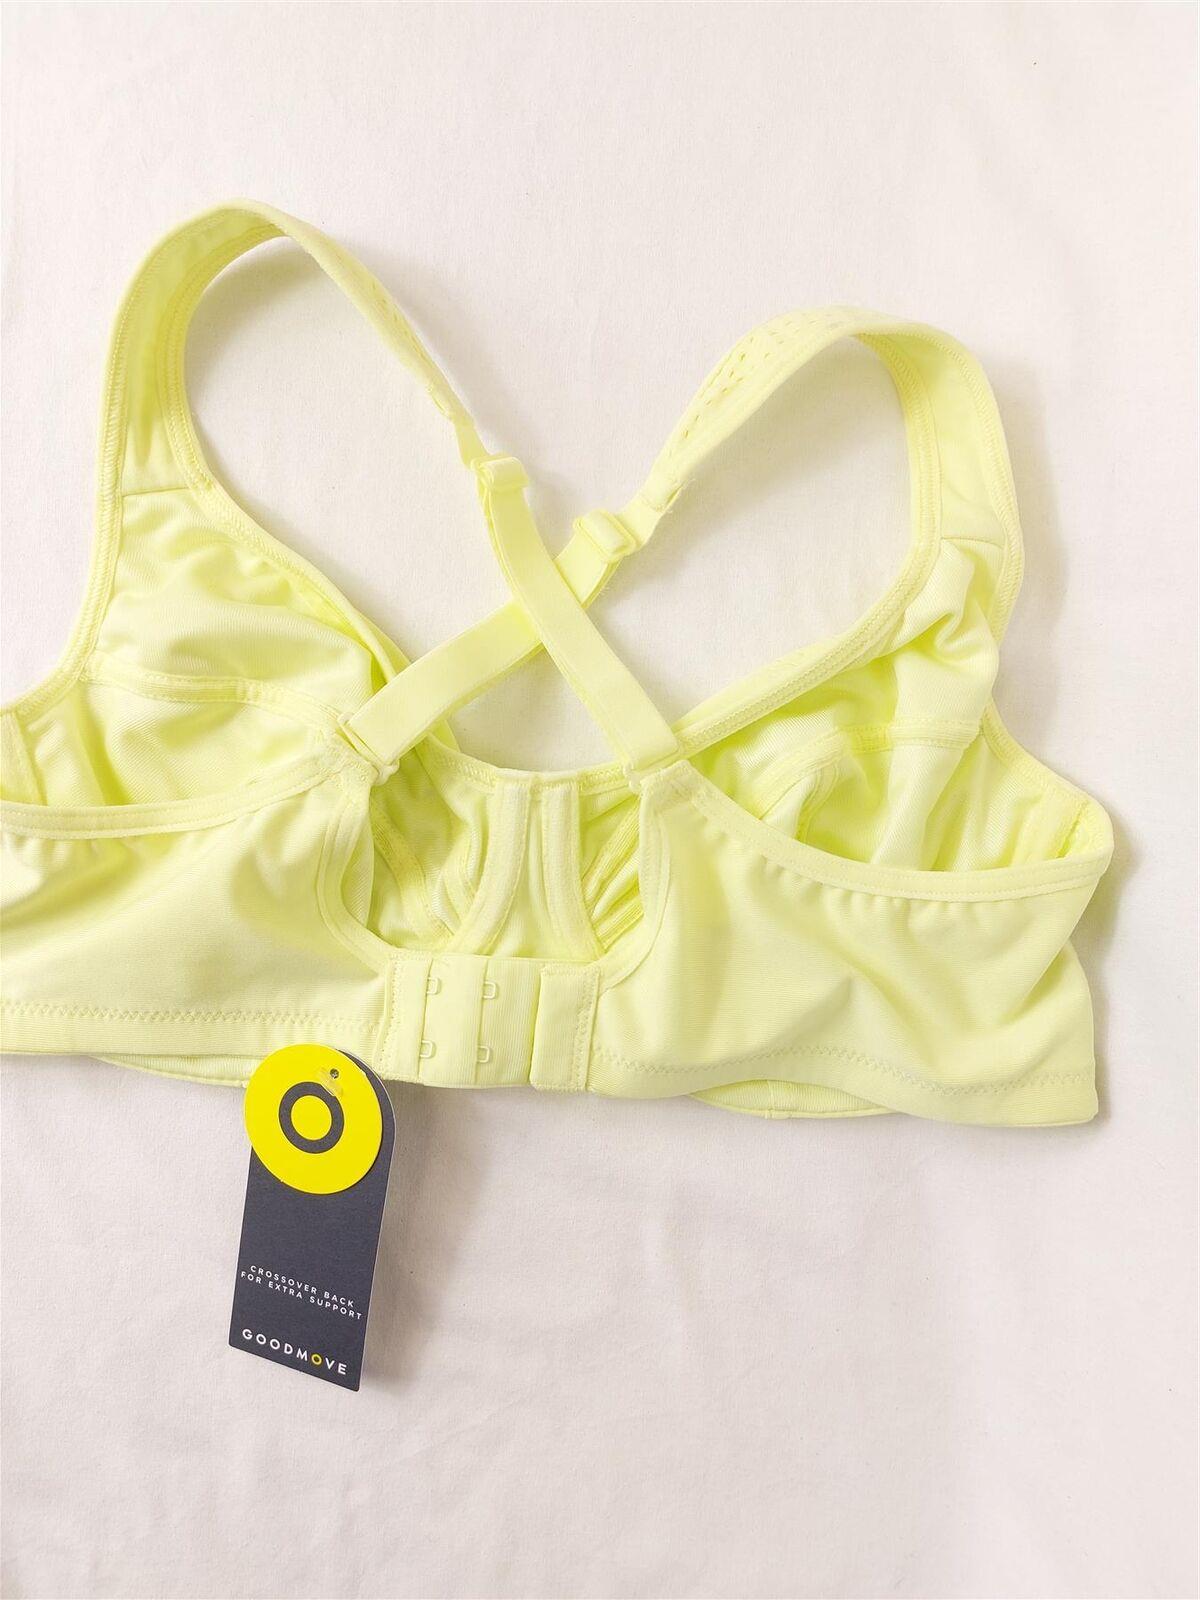 MS Sports Bra High-Impact Underwired Non-Padded Brand New High Street Store